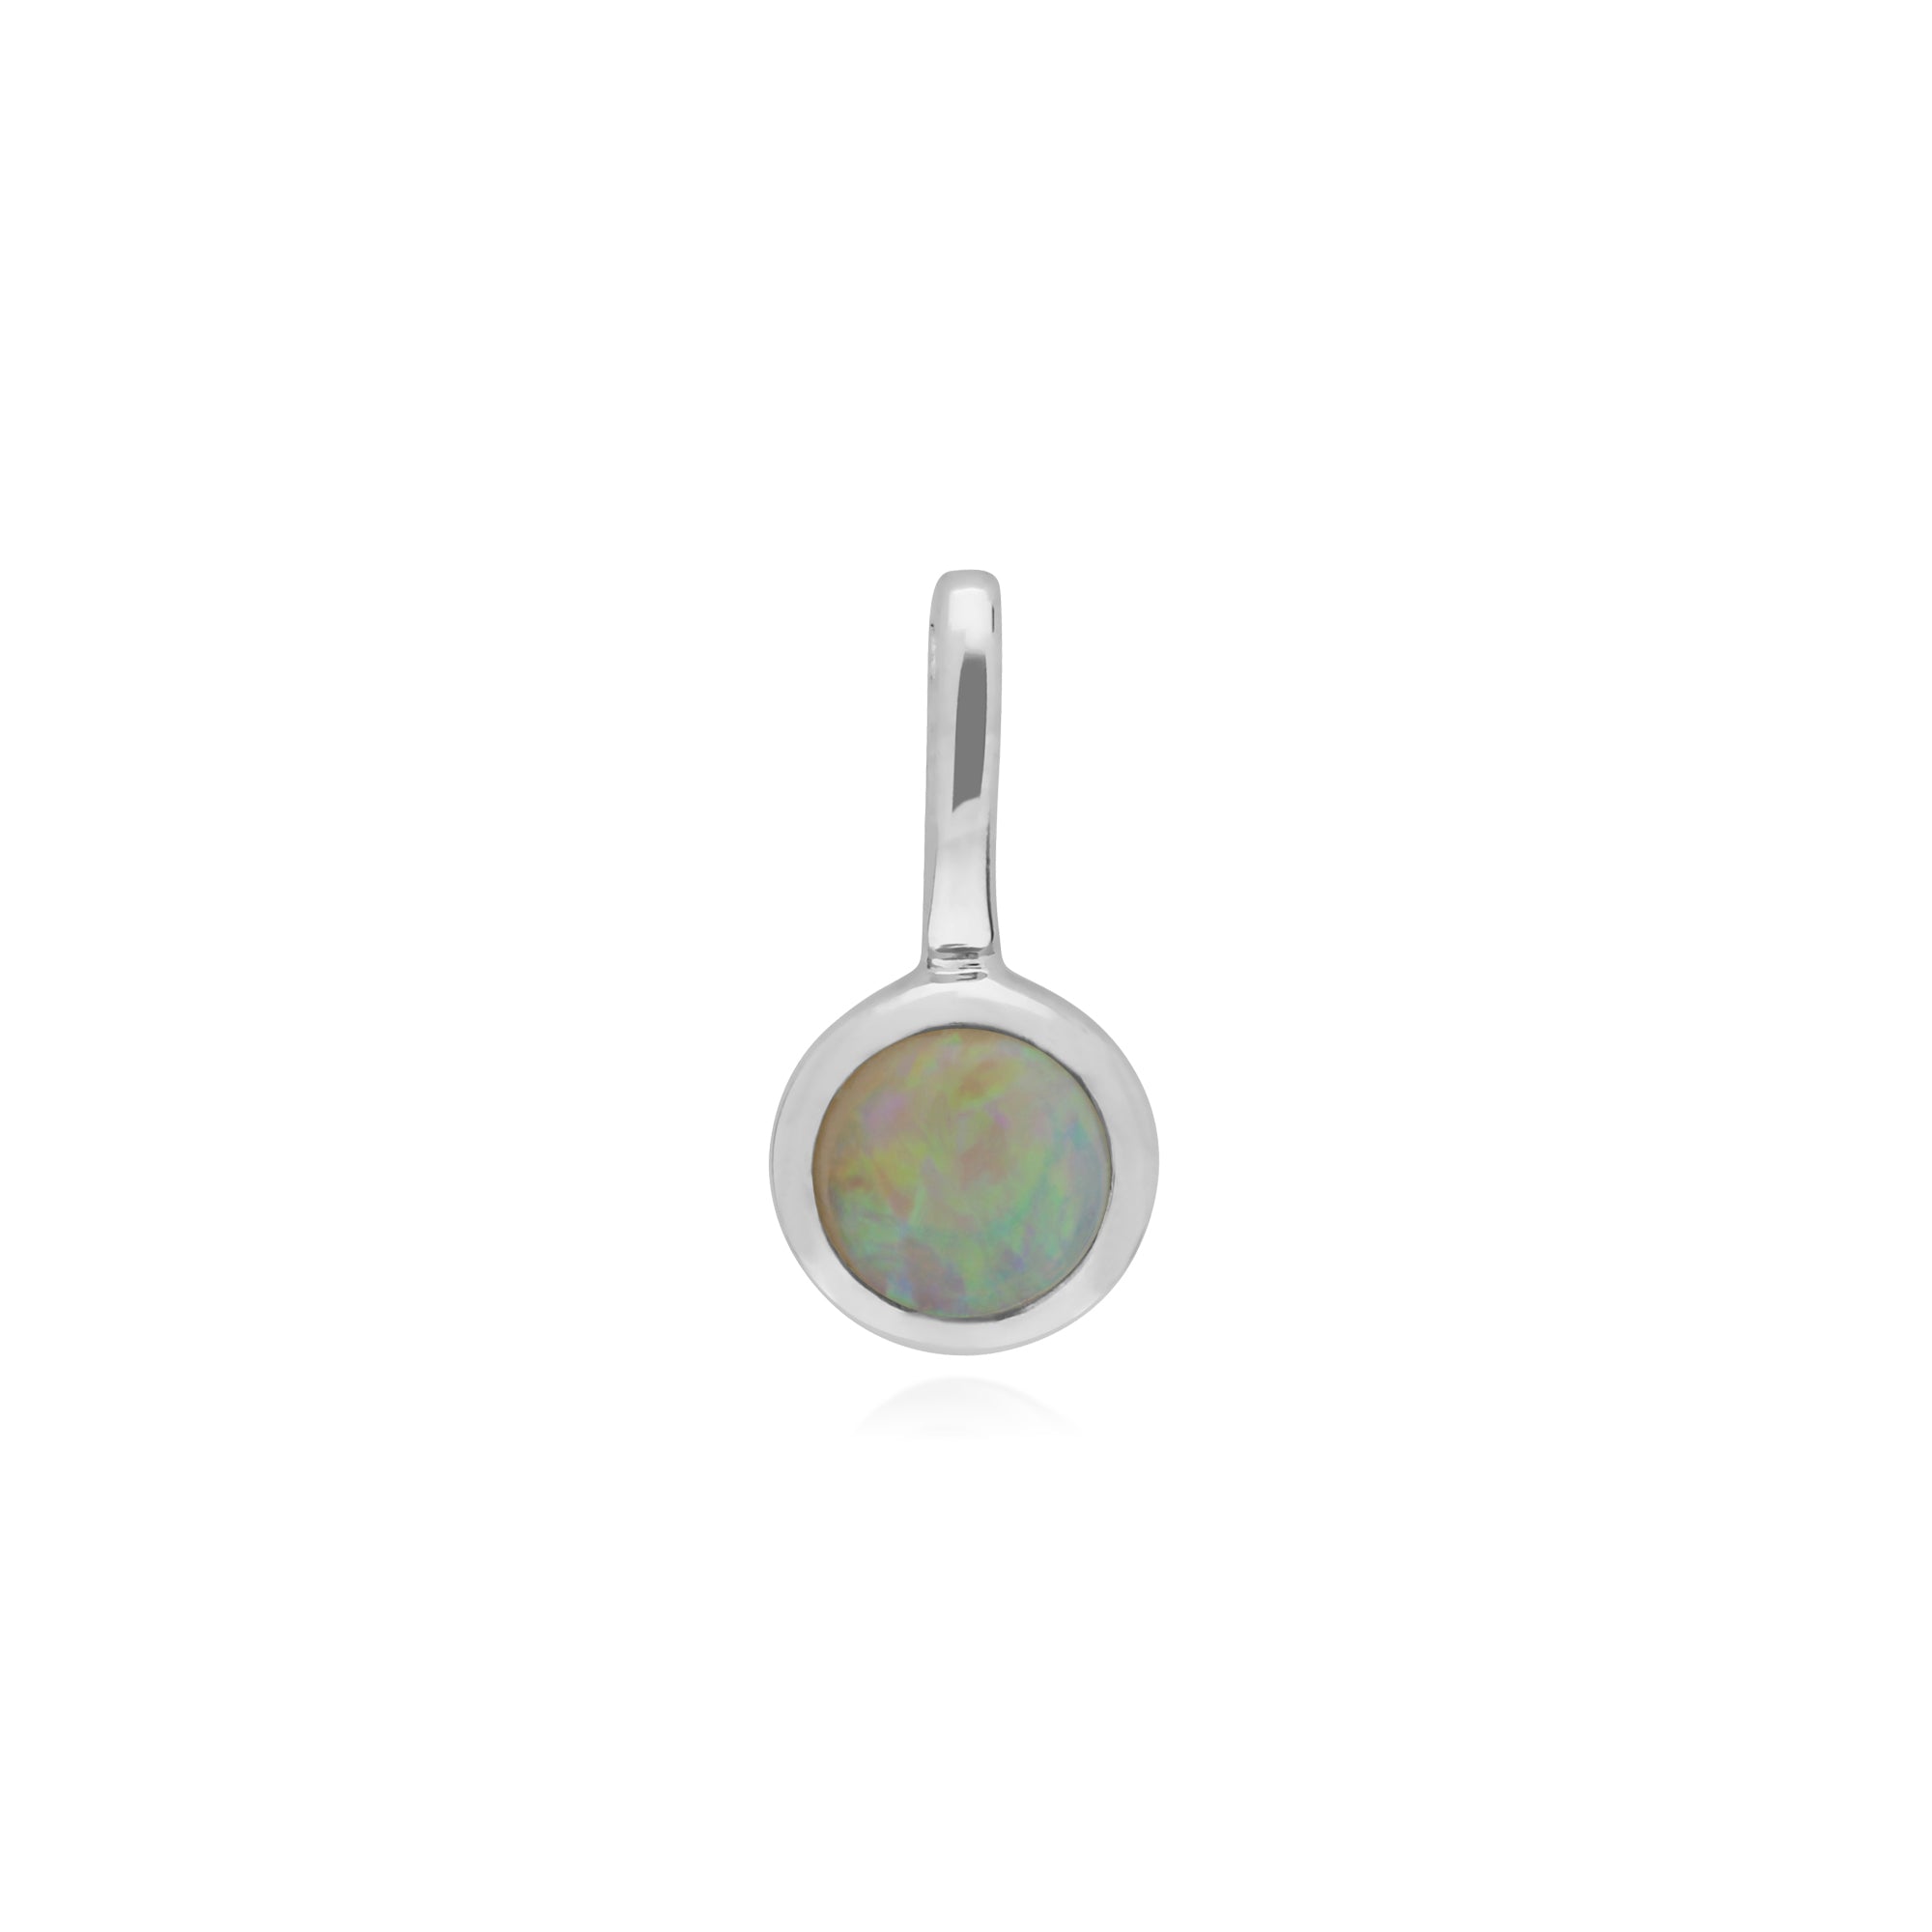 270P028402925-270P027001925 Classic Heart Lock Pendant & Opal Charm in 925 Sterling Silver 2